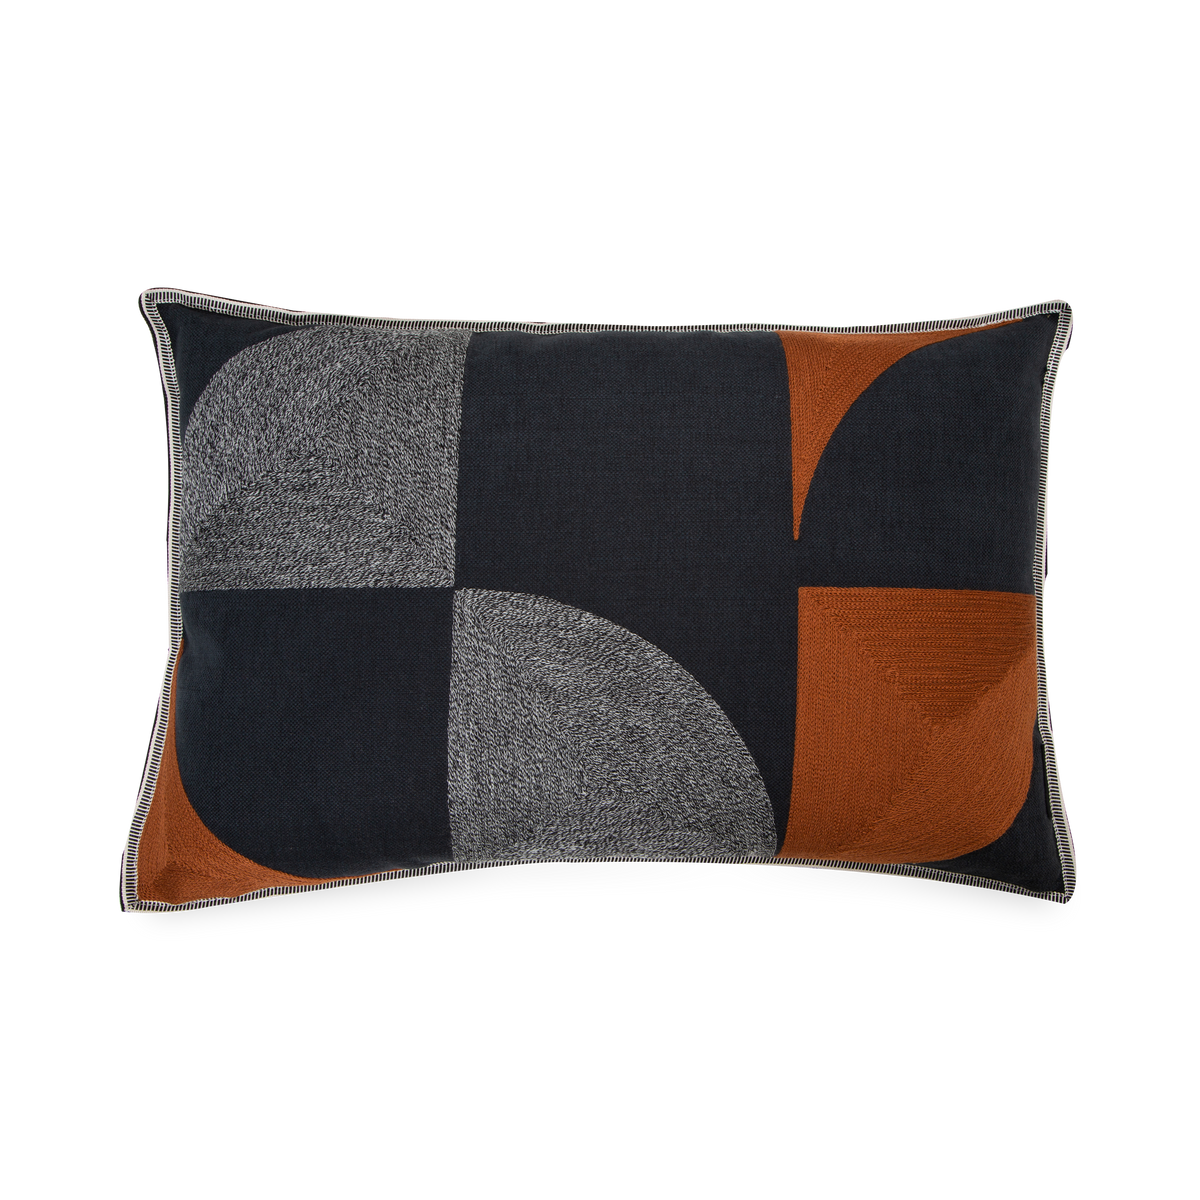 This pillow features a geometric play of angles and curves in relation to colours and textures.